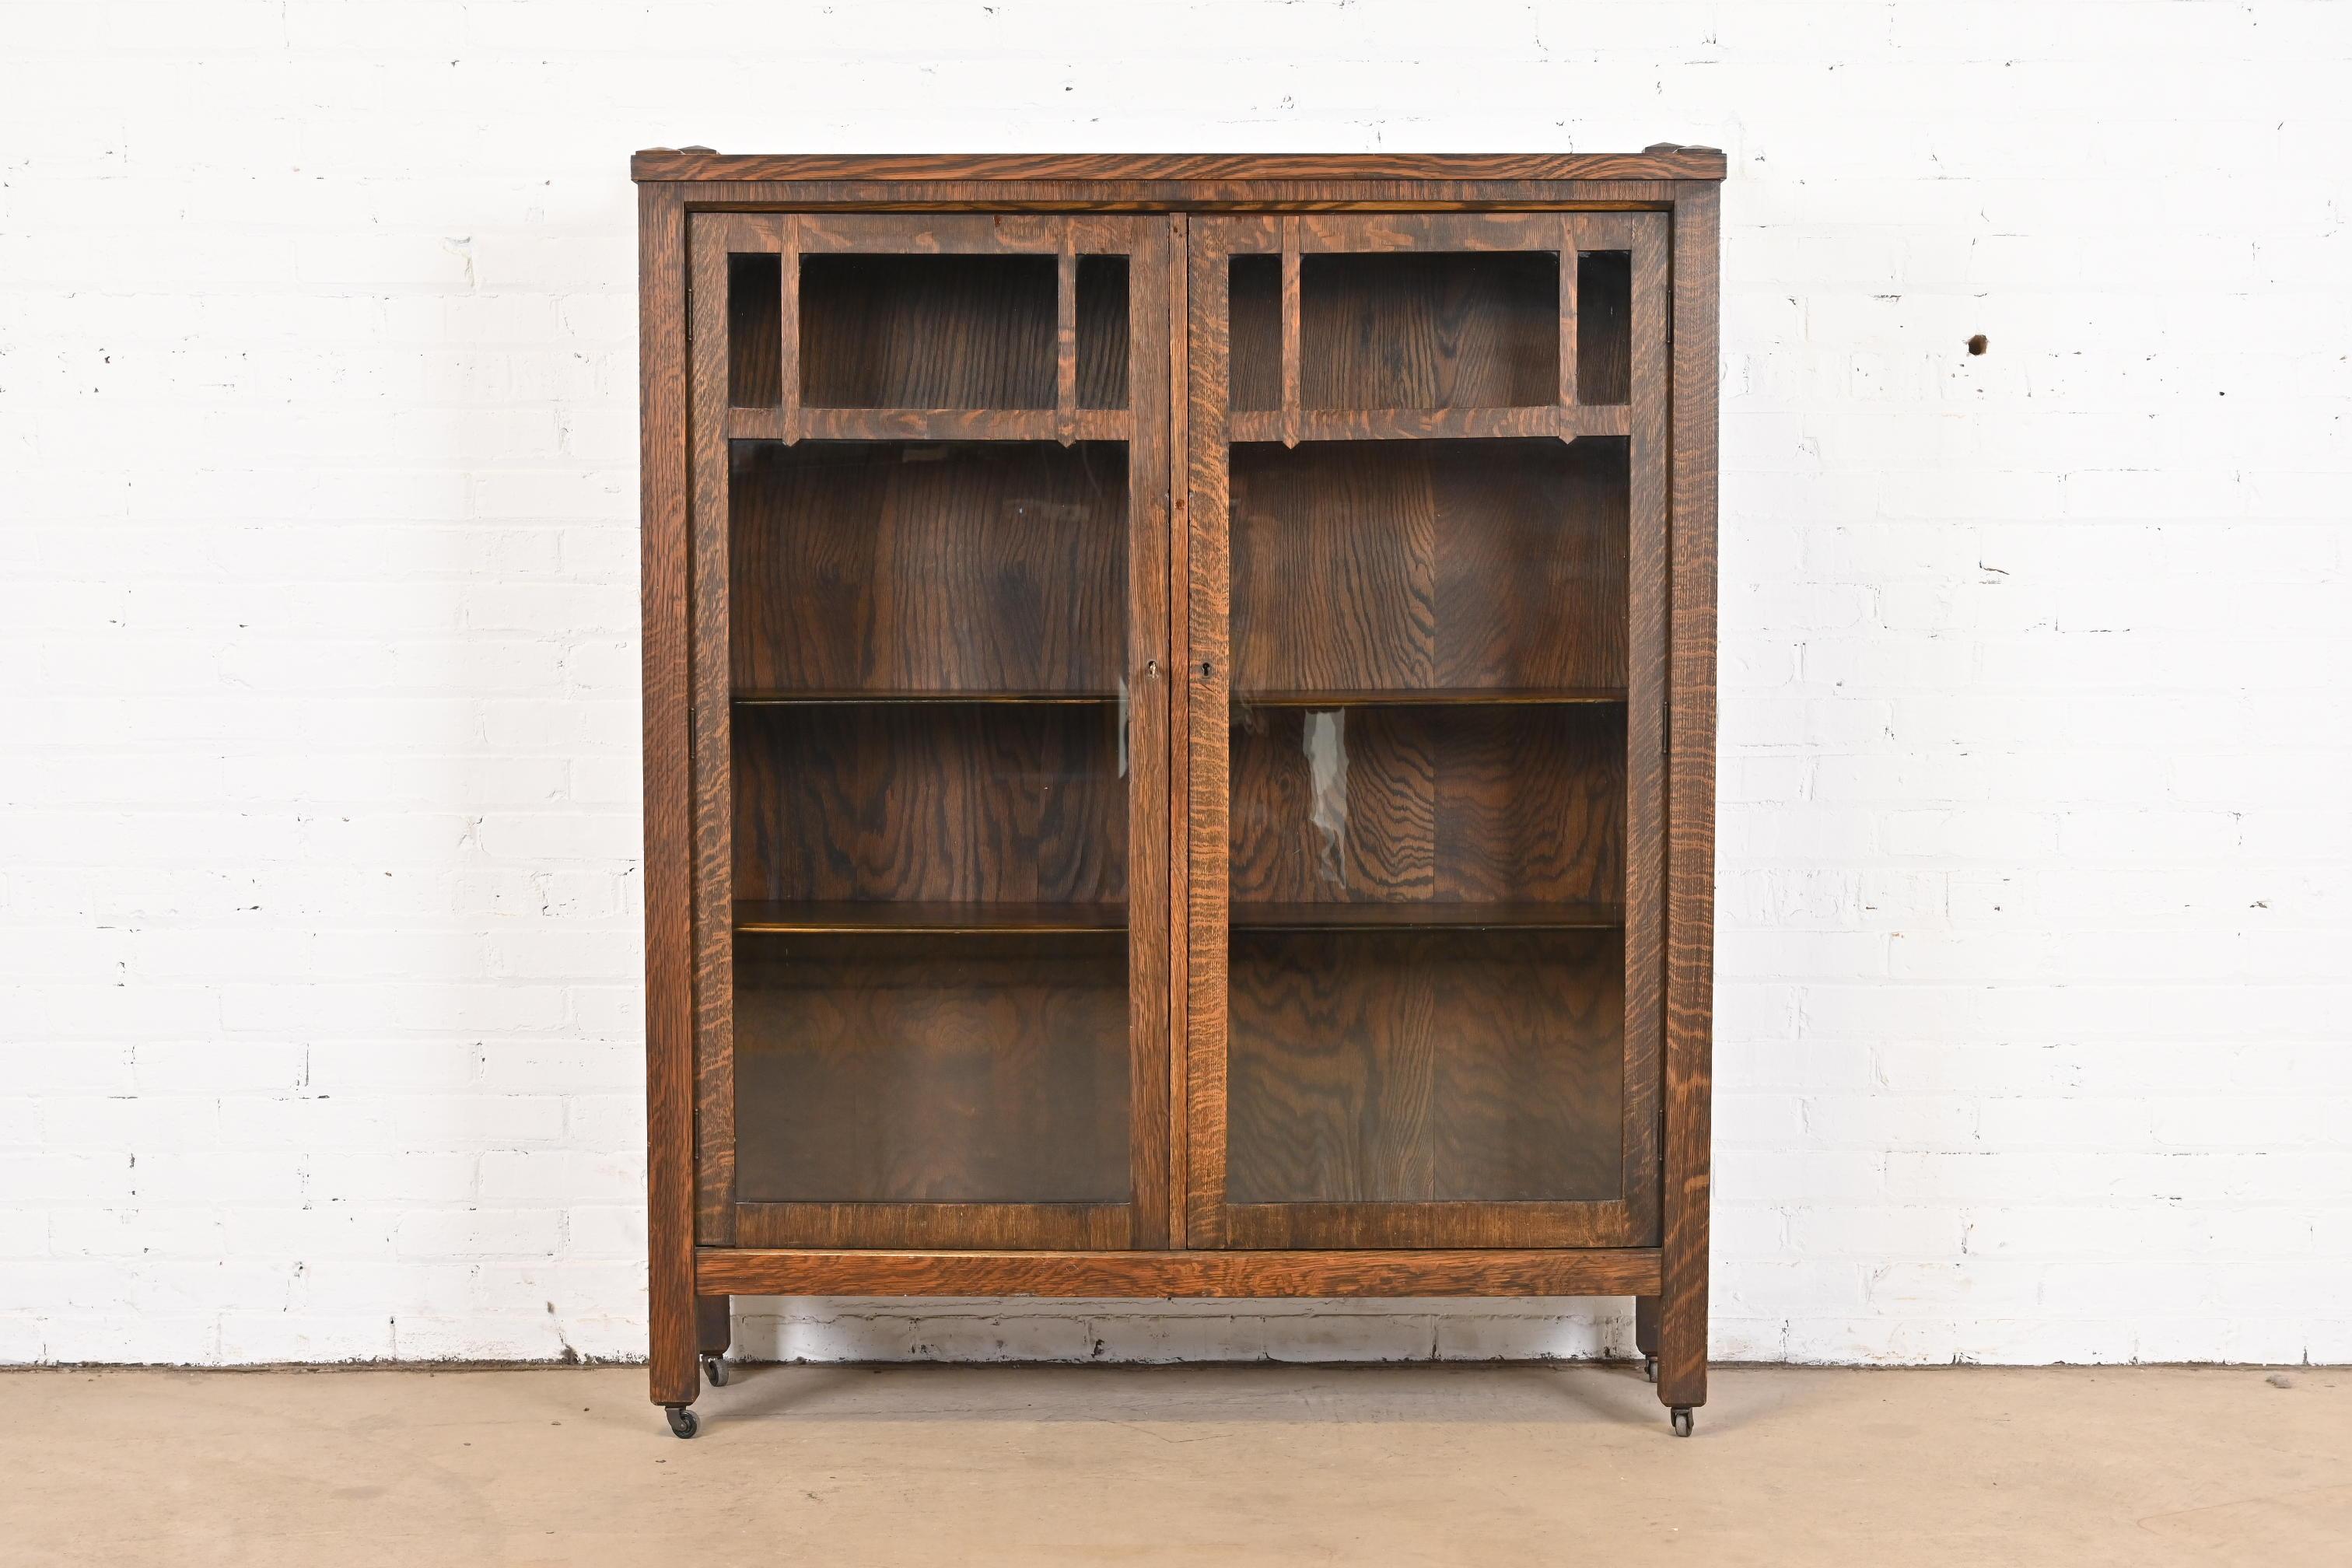 A gorgeous antique Mission or Arts & Crafts double bookcase cabinet

In the manner of Stickley

USA, Circa 1900

Quarter sawn oak, with mullioned glass front doors. Cabinets lock, and key is included.

Measures: 47